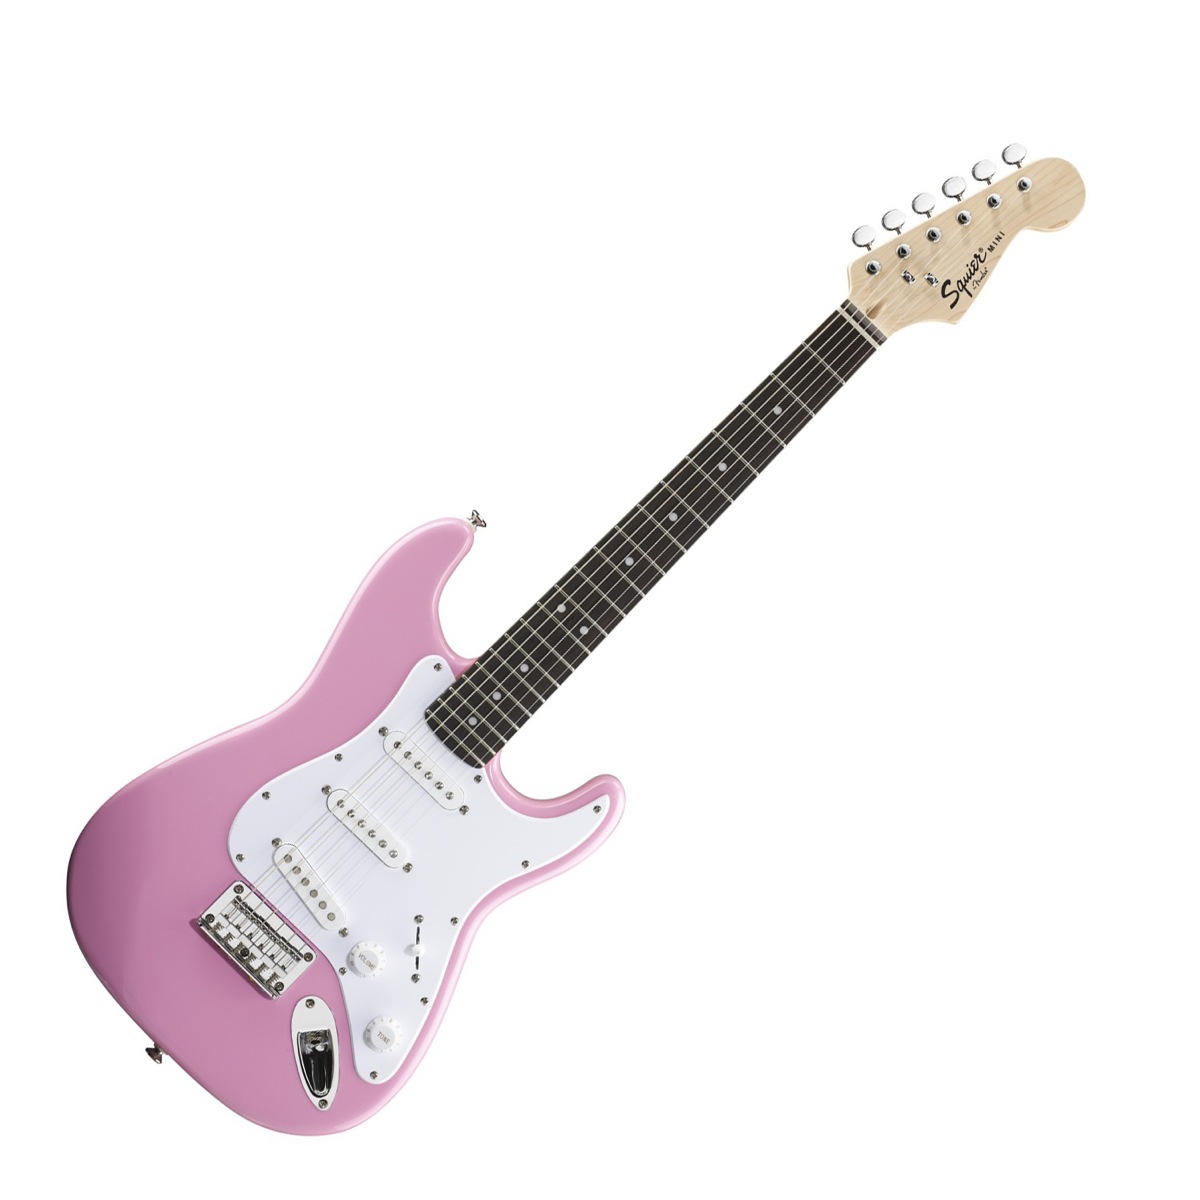 Squier Squier Mini Bullet Stratocaster Electric Guitar, Rosewood Neck - Pink